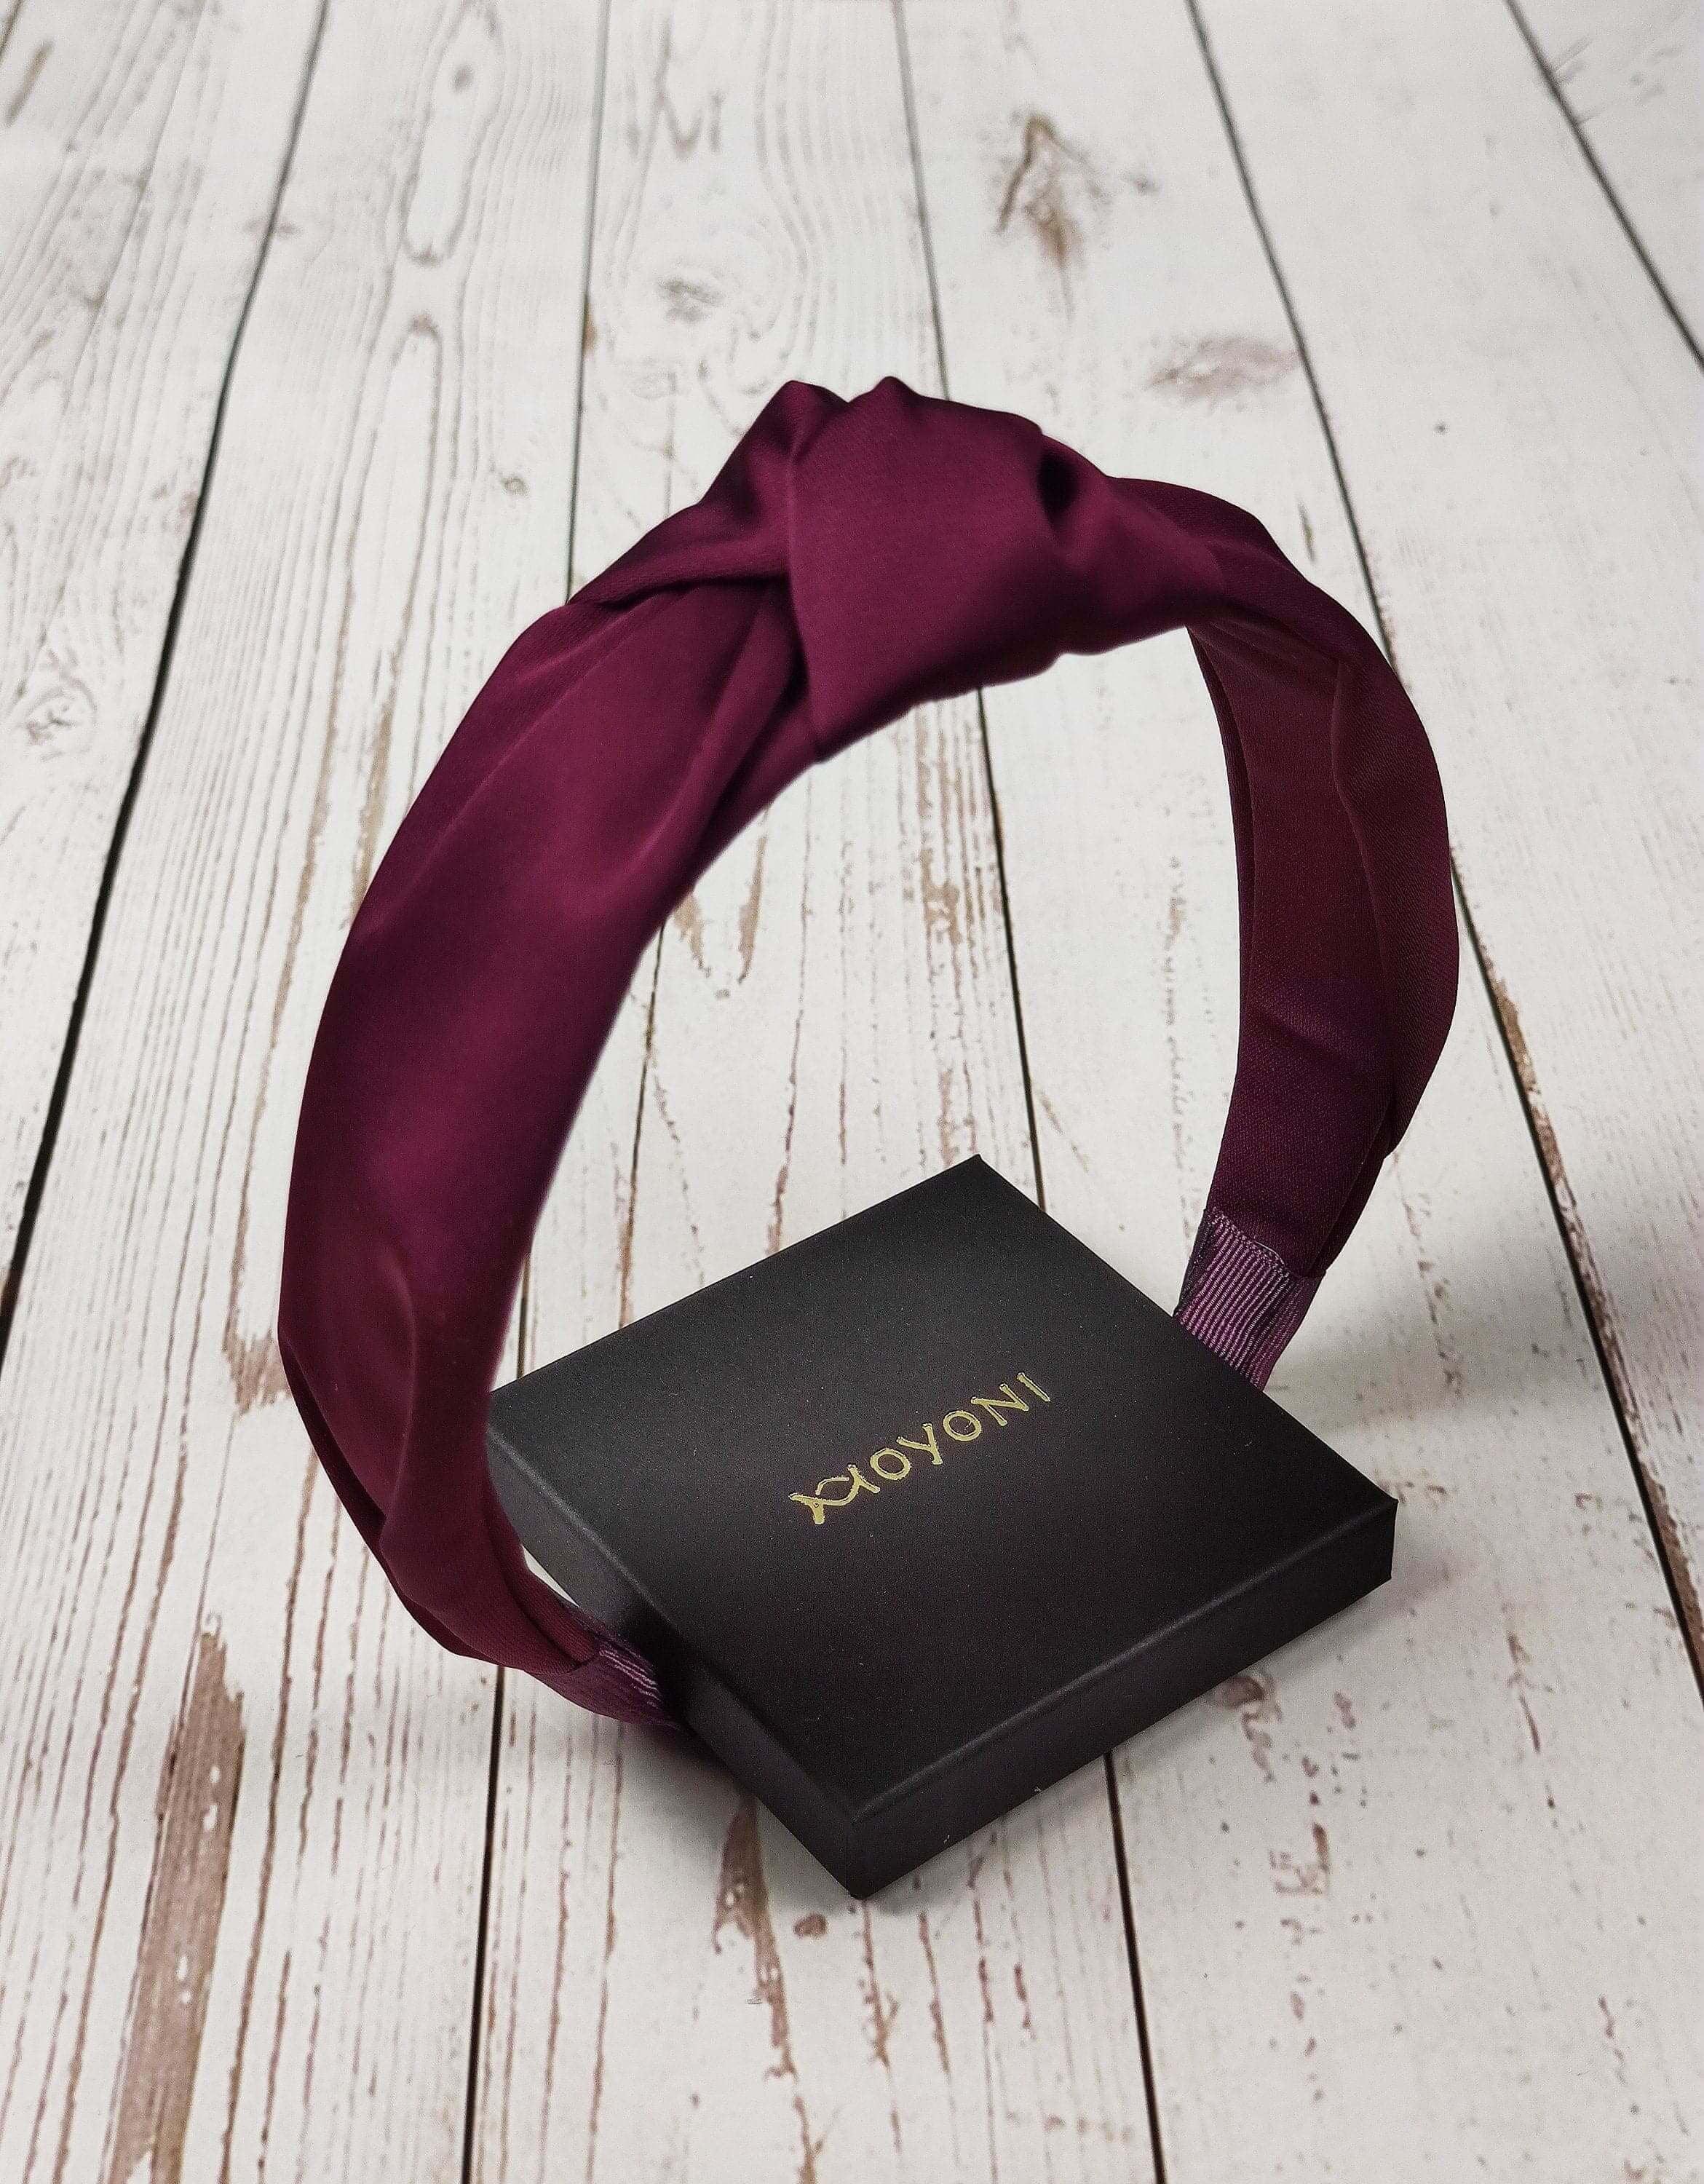 Charming Maroon Satin Knotted Headband for Women - Classic and Fashionable Dark Cherry Hairband without Padded available at Moyoni Design